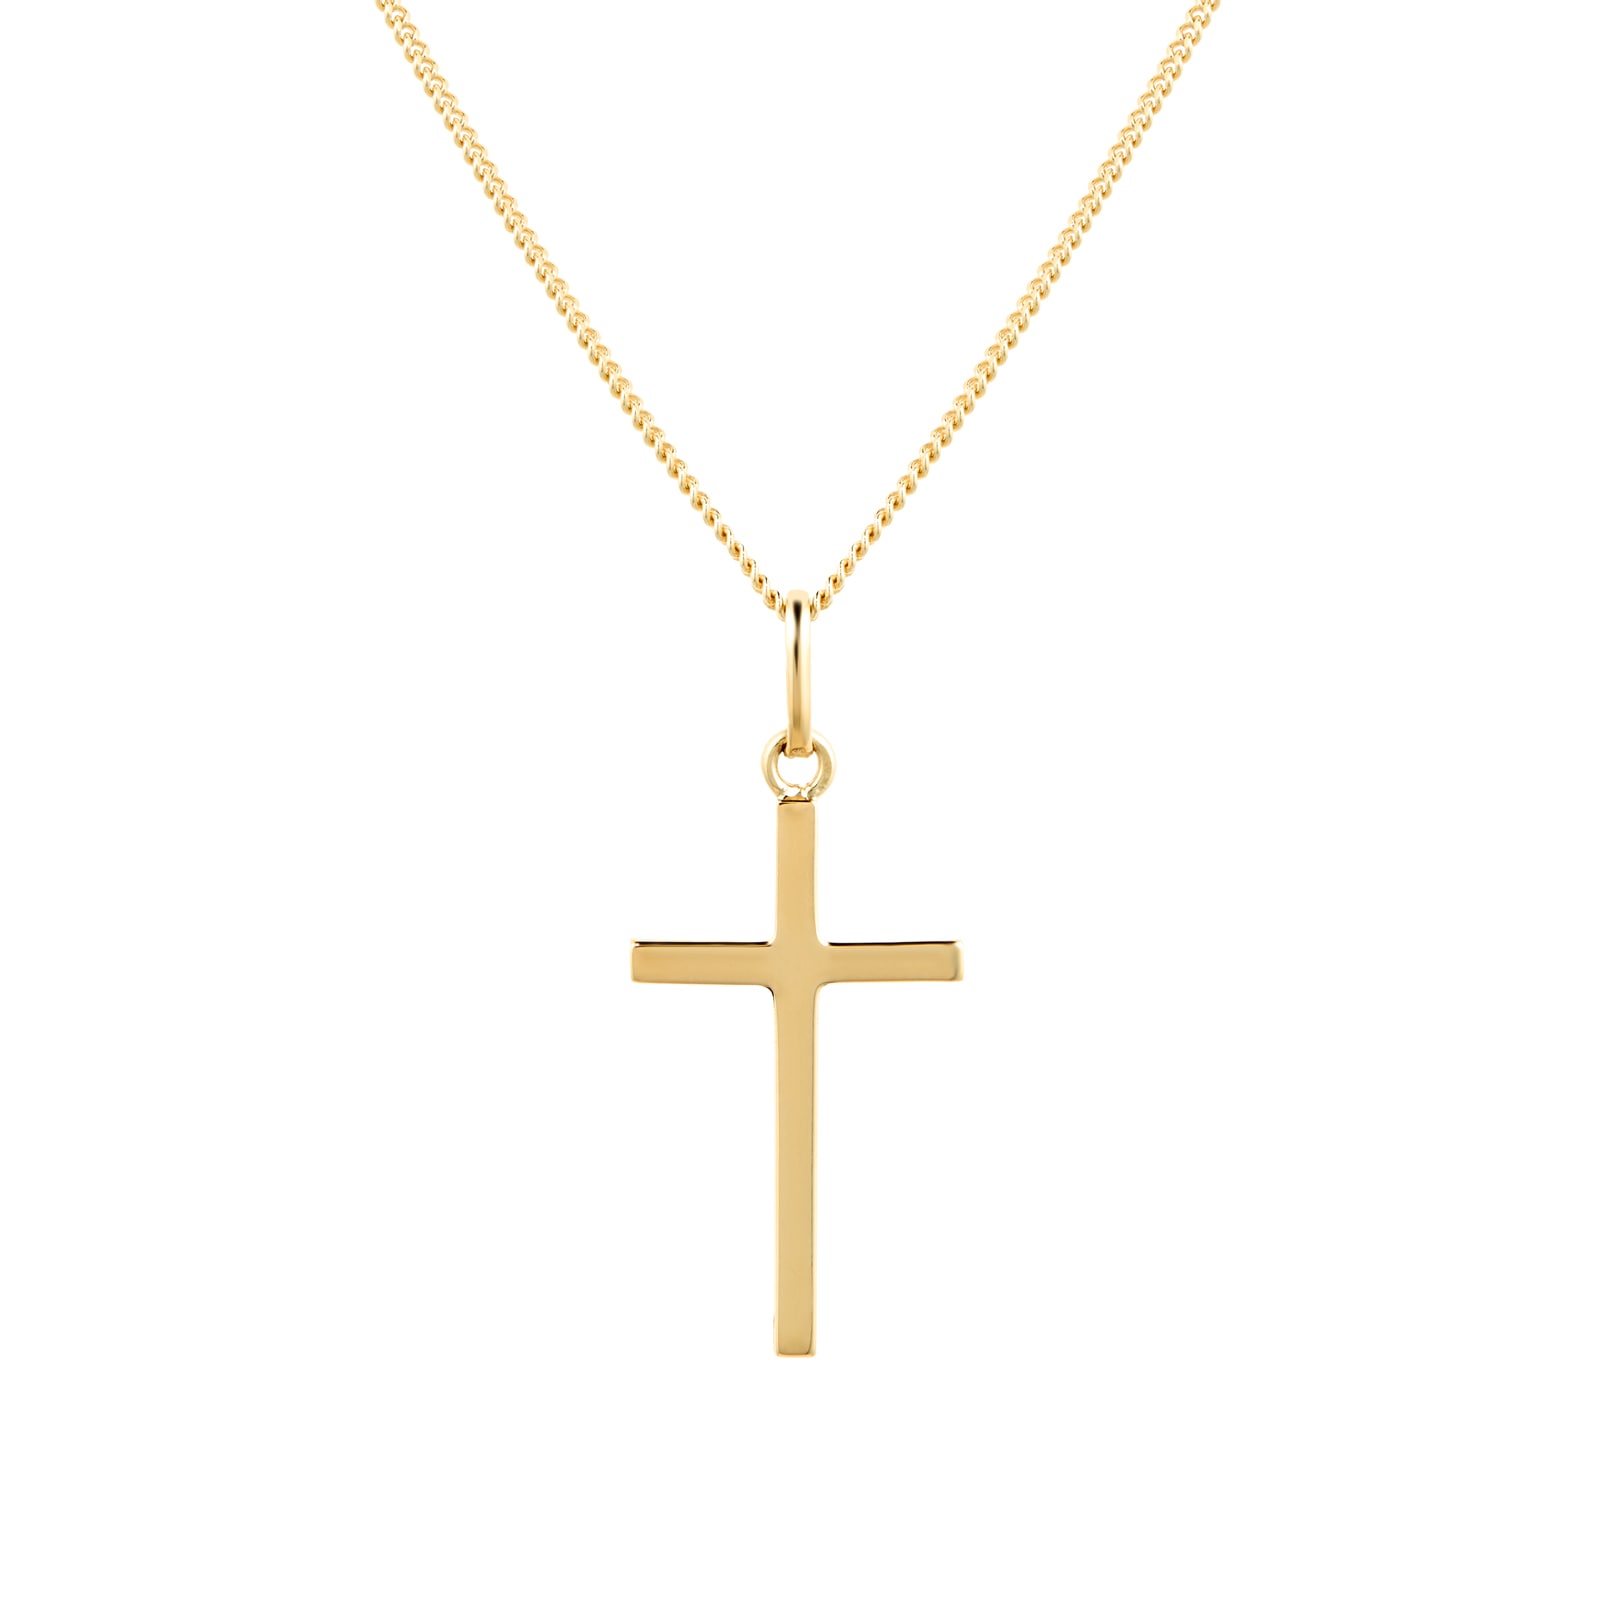 14 Karat Religious Gold Crucifix Pendant k395 – Beeghly & Co.